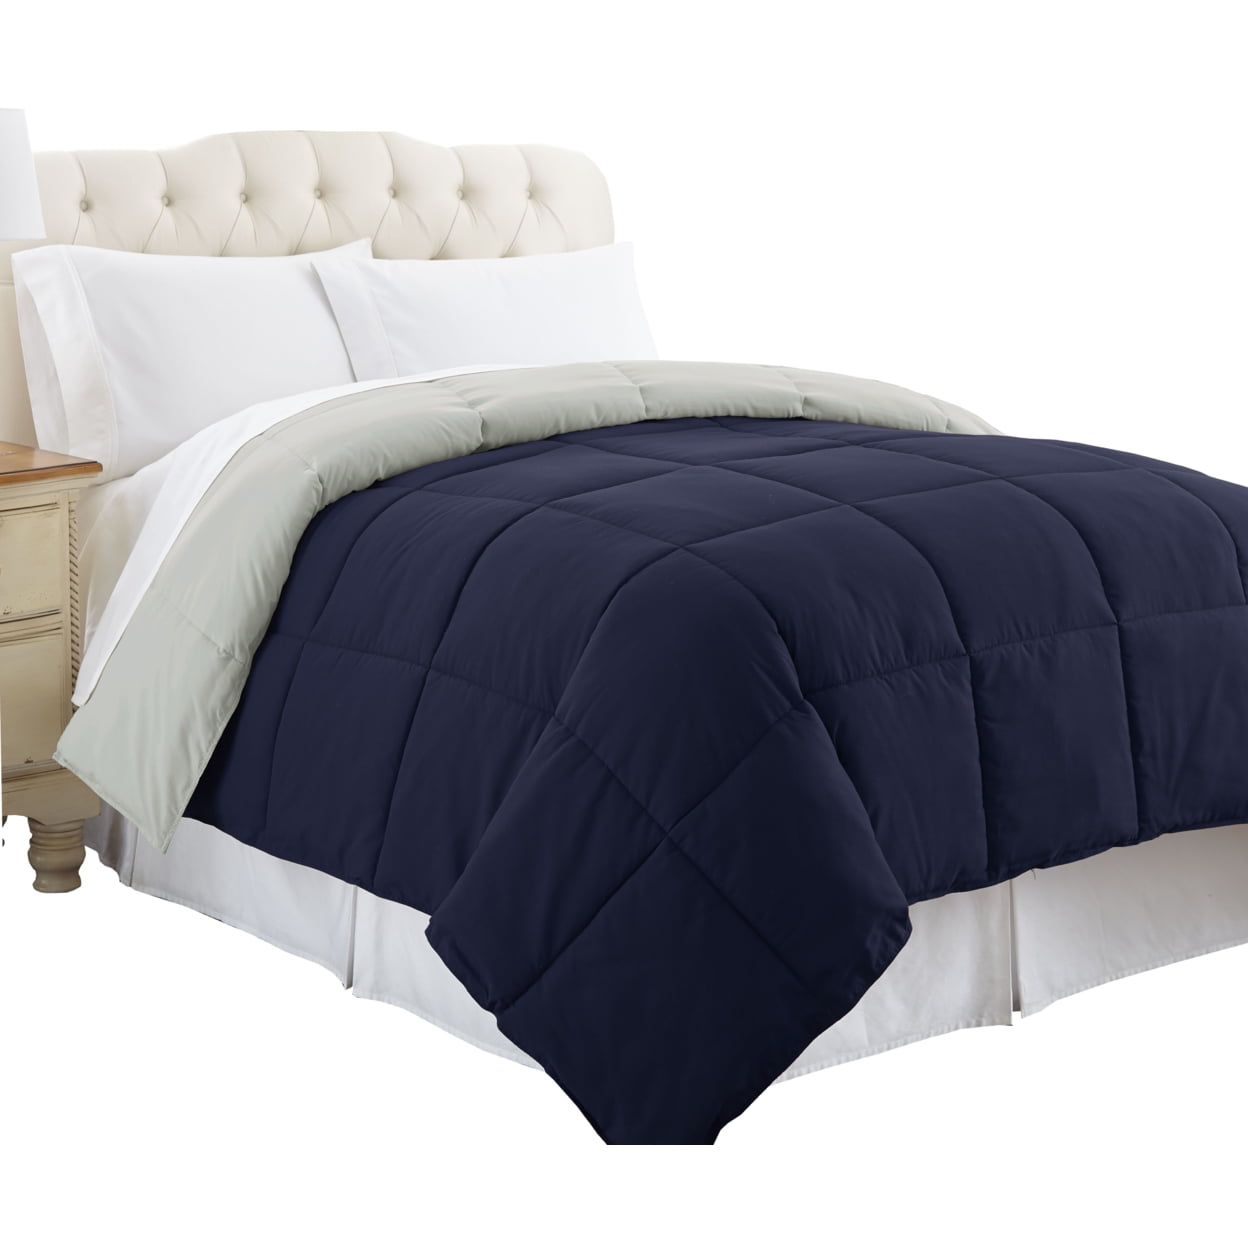 Bm46027 Genoa Box Quilted Twin Size Reversible Comforter, Silver & Blue